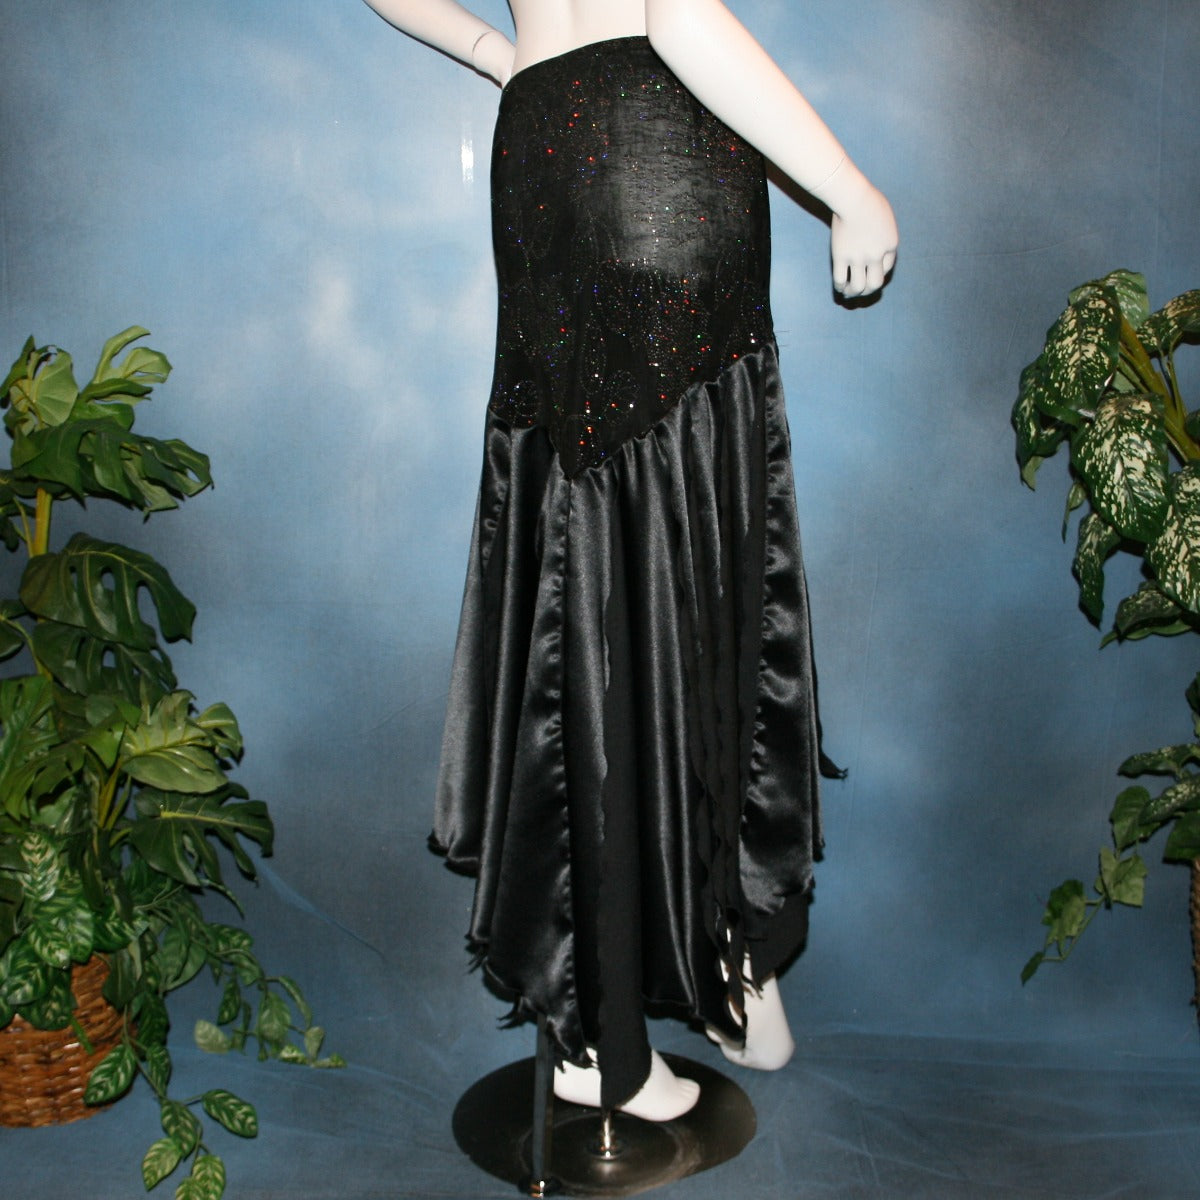 Crystal's Creations back view of Black ballroom skirt created with a beautifully patterned glitter slinky sarong hip sash piece that flairs out to yards of black satin panels, would pair beautifully with a black body suit or one could be custom created for an extra fee.